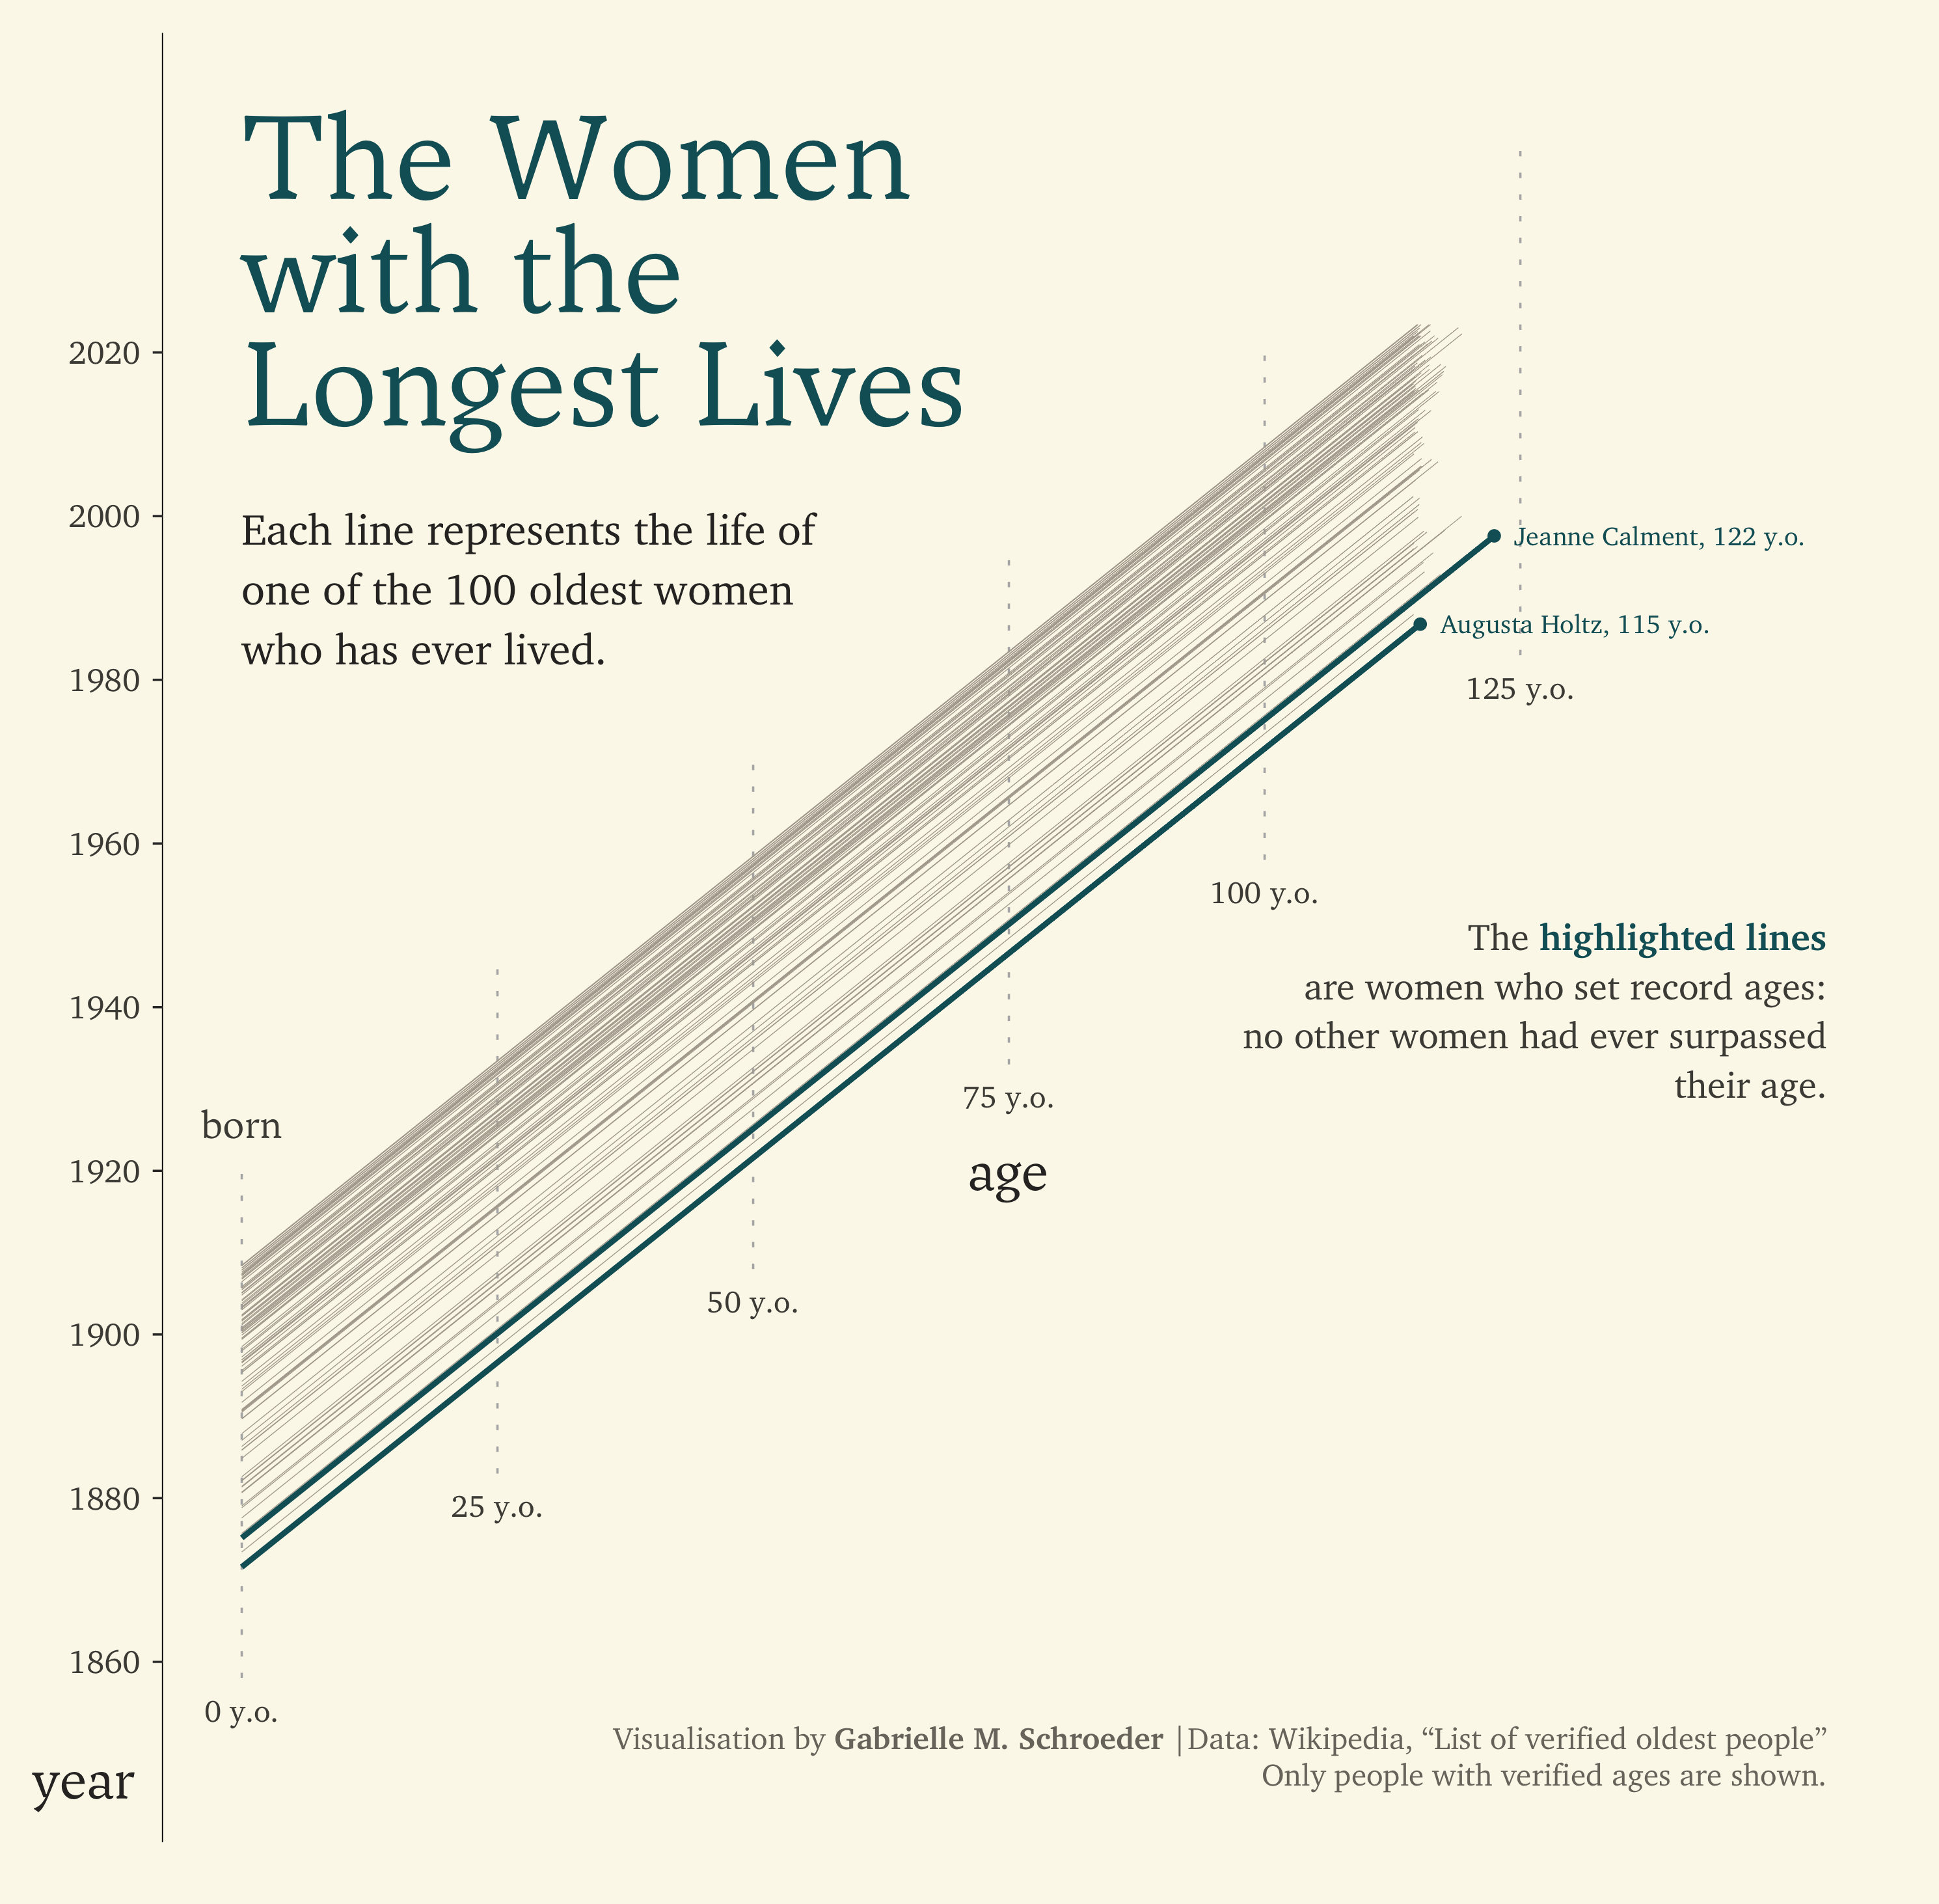 Visualisation of the lives of the 100 verified oldest women who have ever lived. The dates each woman lived are plotted versus their ages on each date, creating 100 diagonal lines representing the 100 lives. The lines of the two women who set record ages (at the time of their death) are highlighted in blue. The oldest women who ever lived is Jeanne Calment, who died in 1997 at 122 years old.